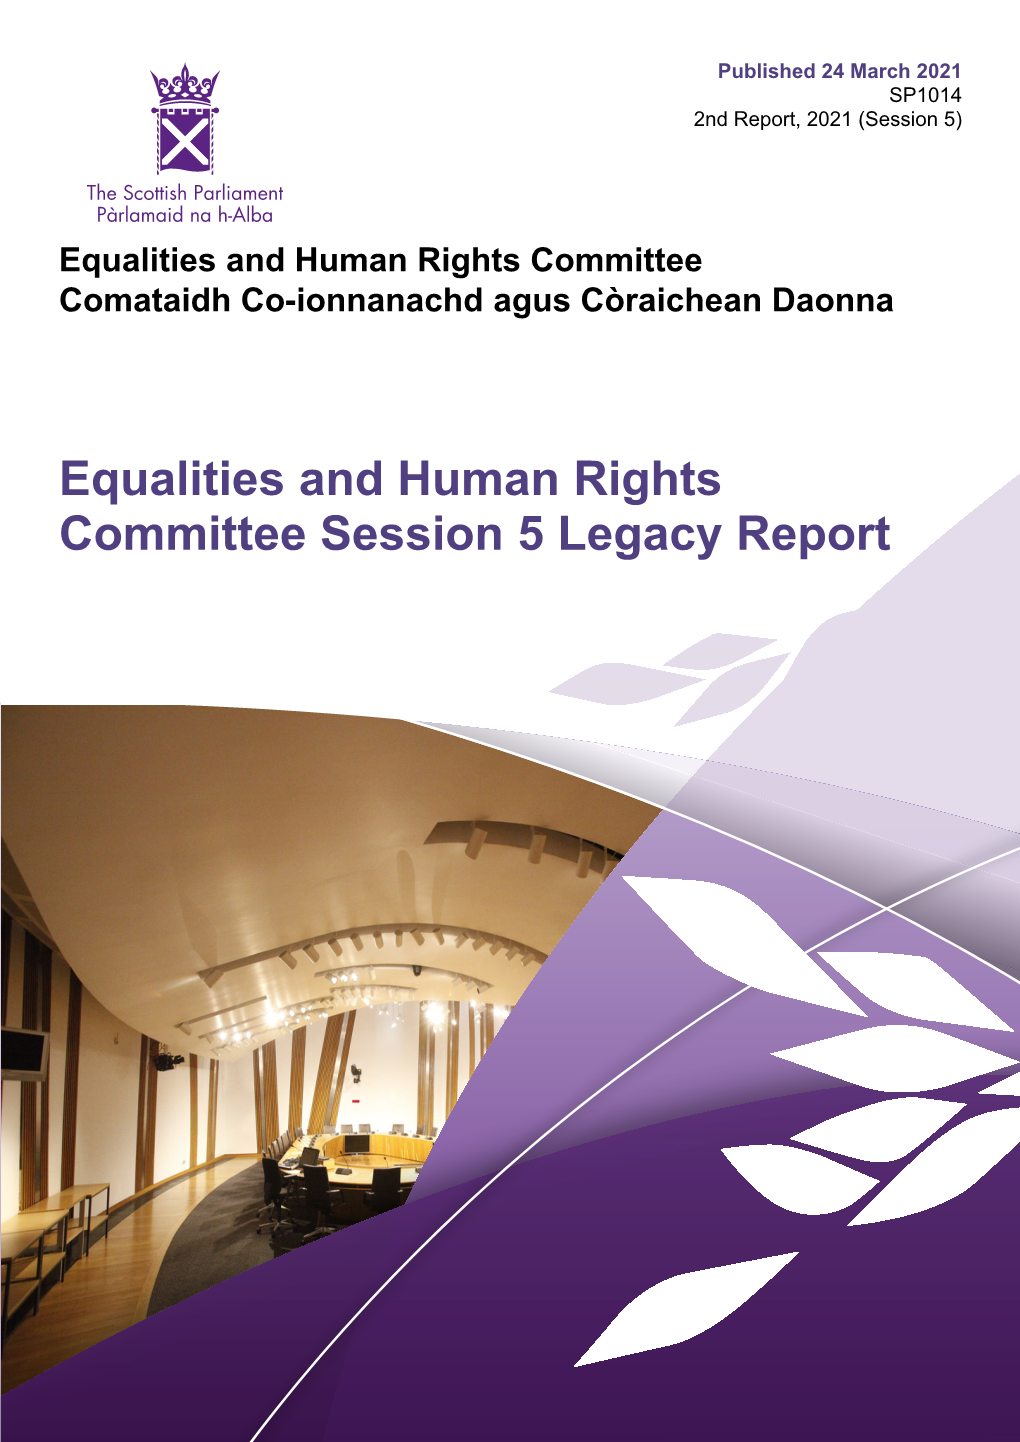 Equalities and Human Rights Committee Session 5 Legacy Report Published in Scotland by the Scottish Parliamentary Corporate Body